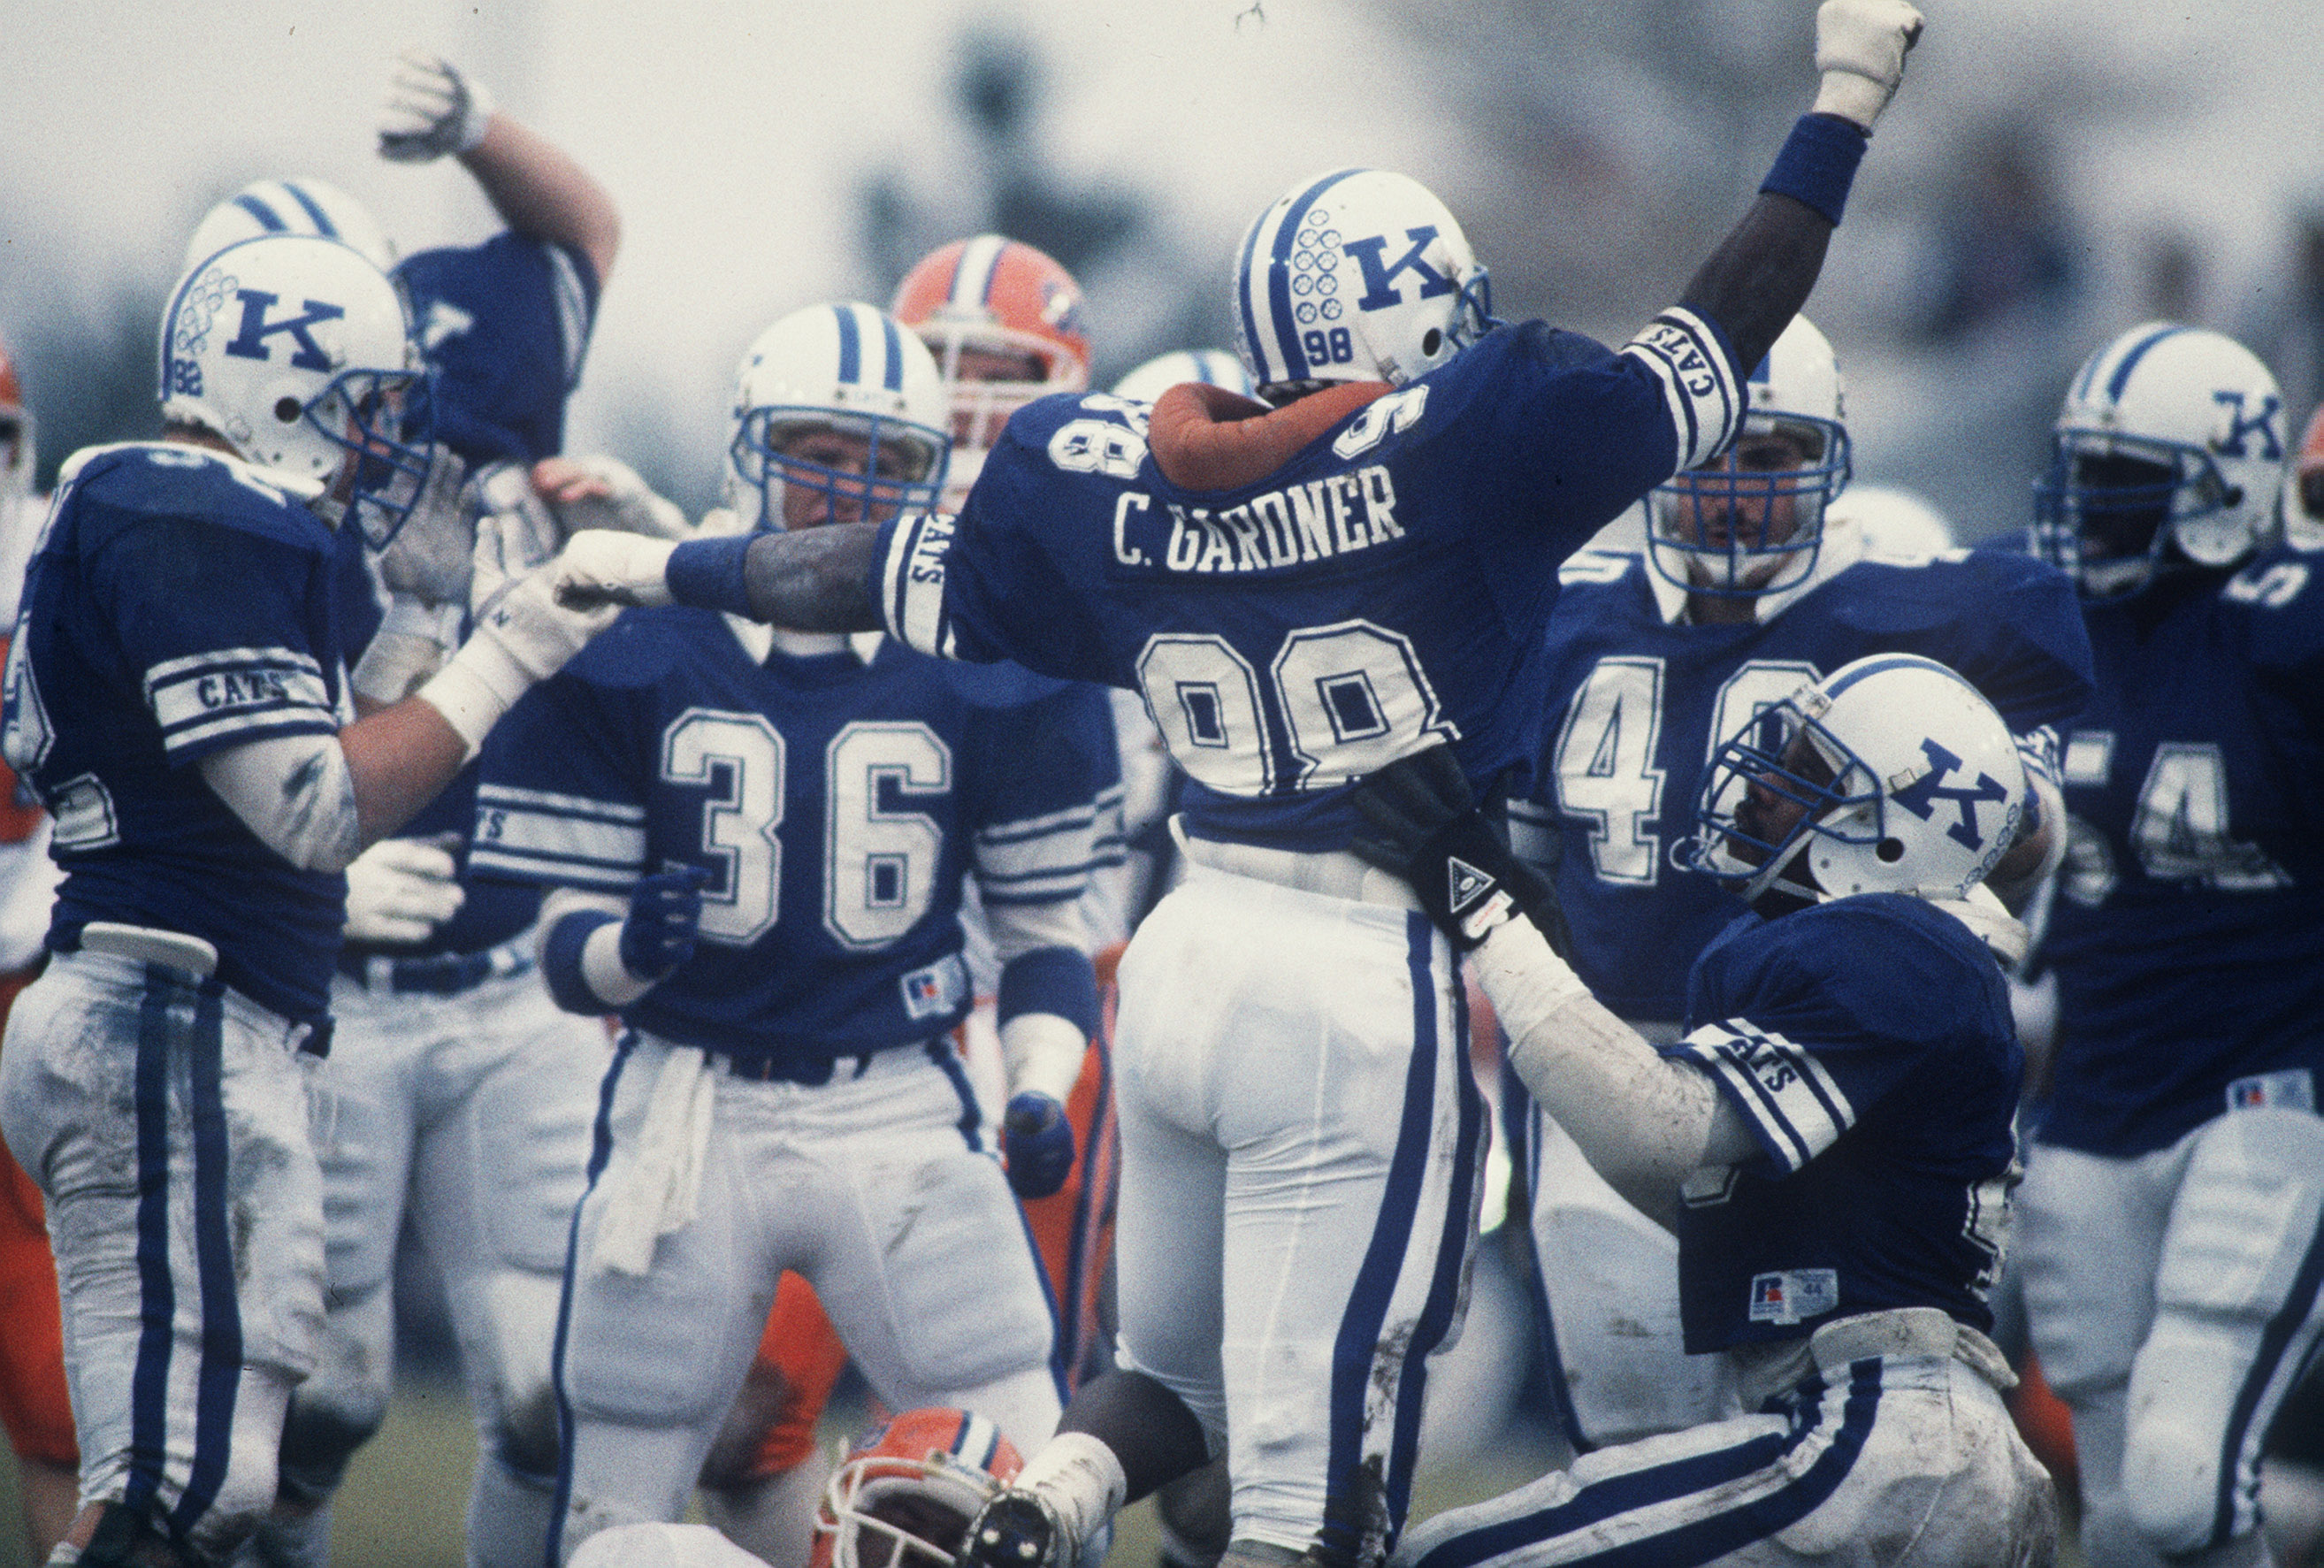 1986 FILE PHOTO. The University of Kentucky players celebrated during UK's 10-3 victory over the University of Florida on November 15, 1986 at Commonwealth Stadium in Lexington, KY.